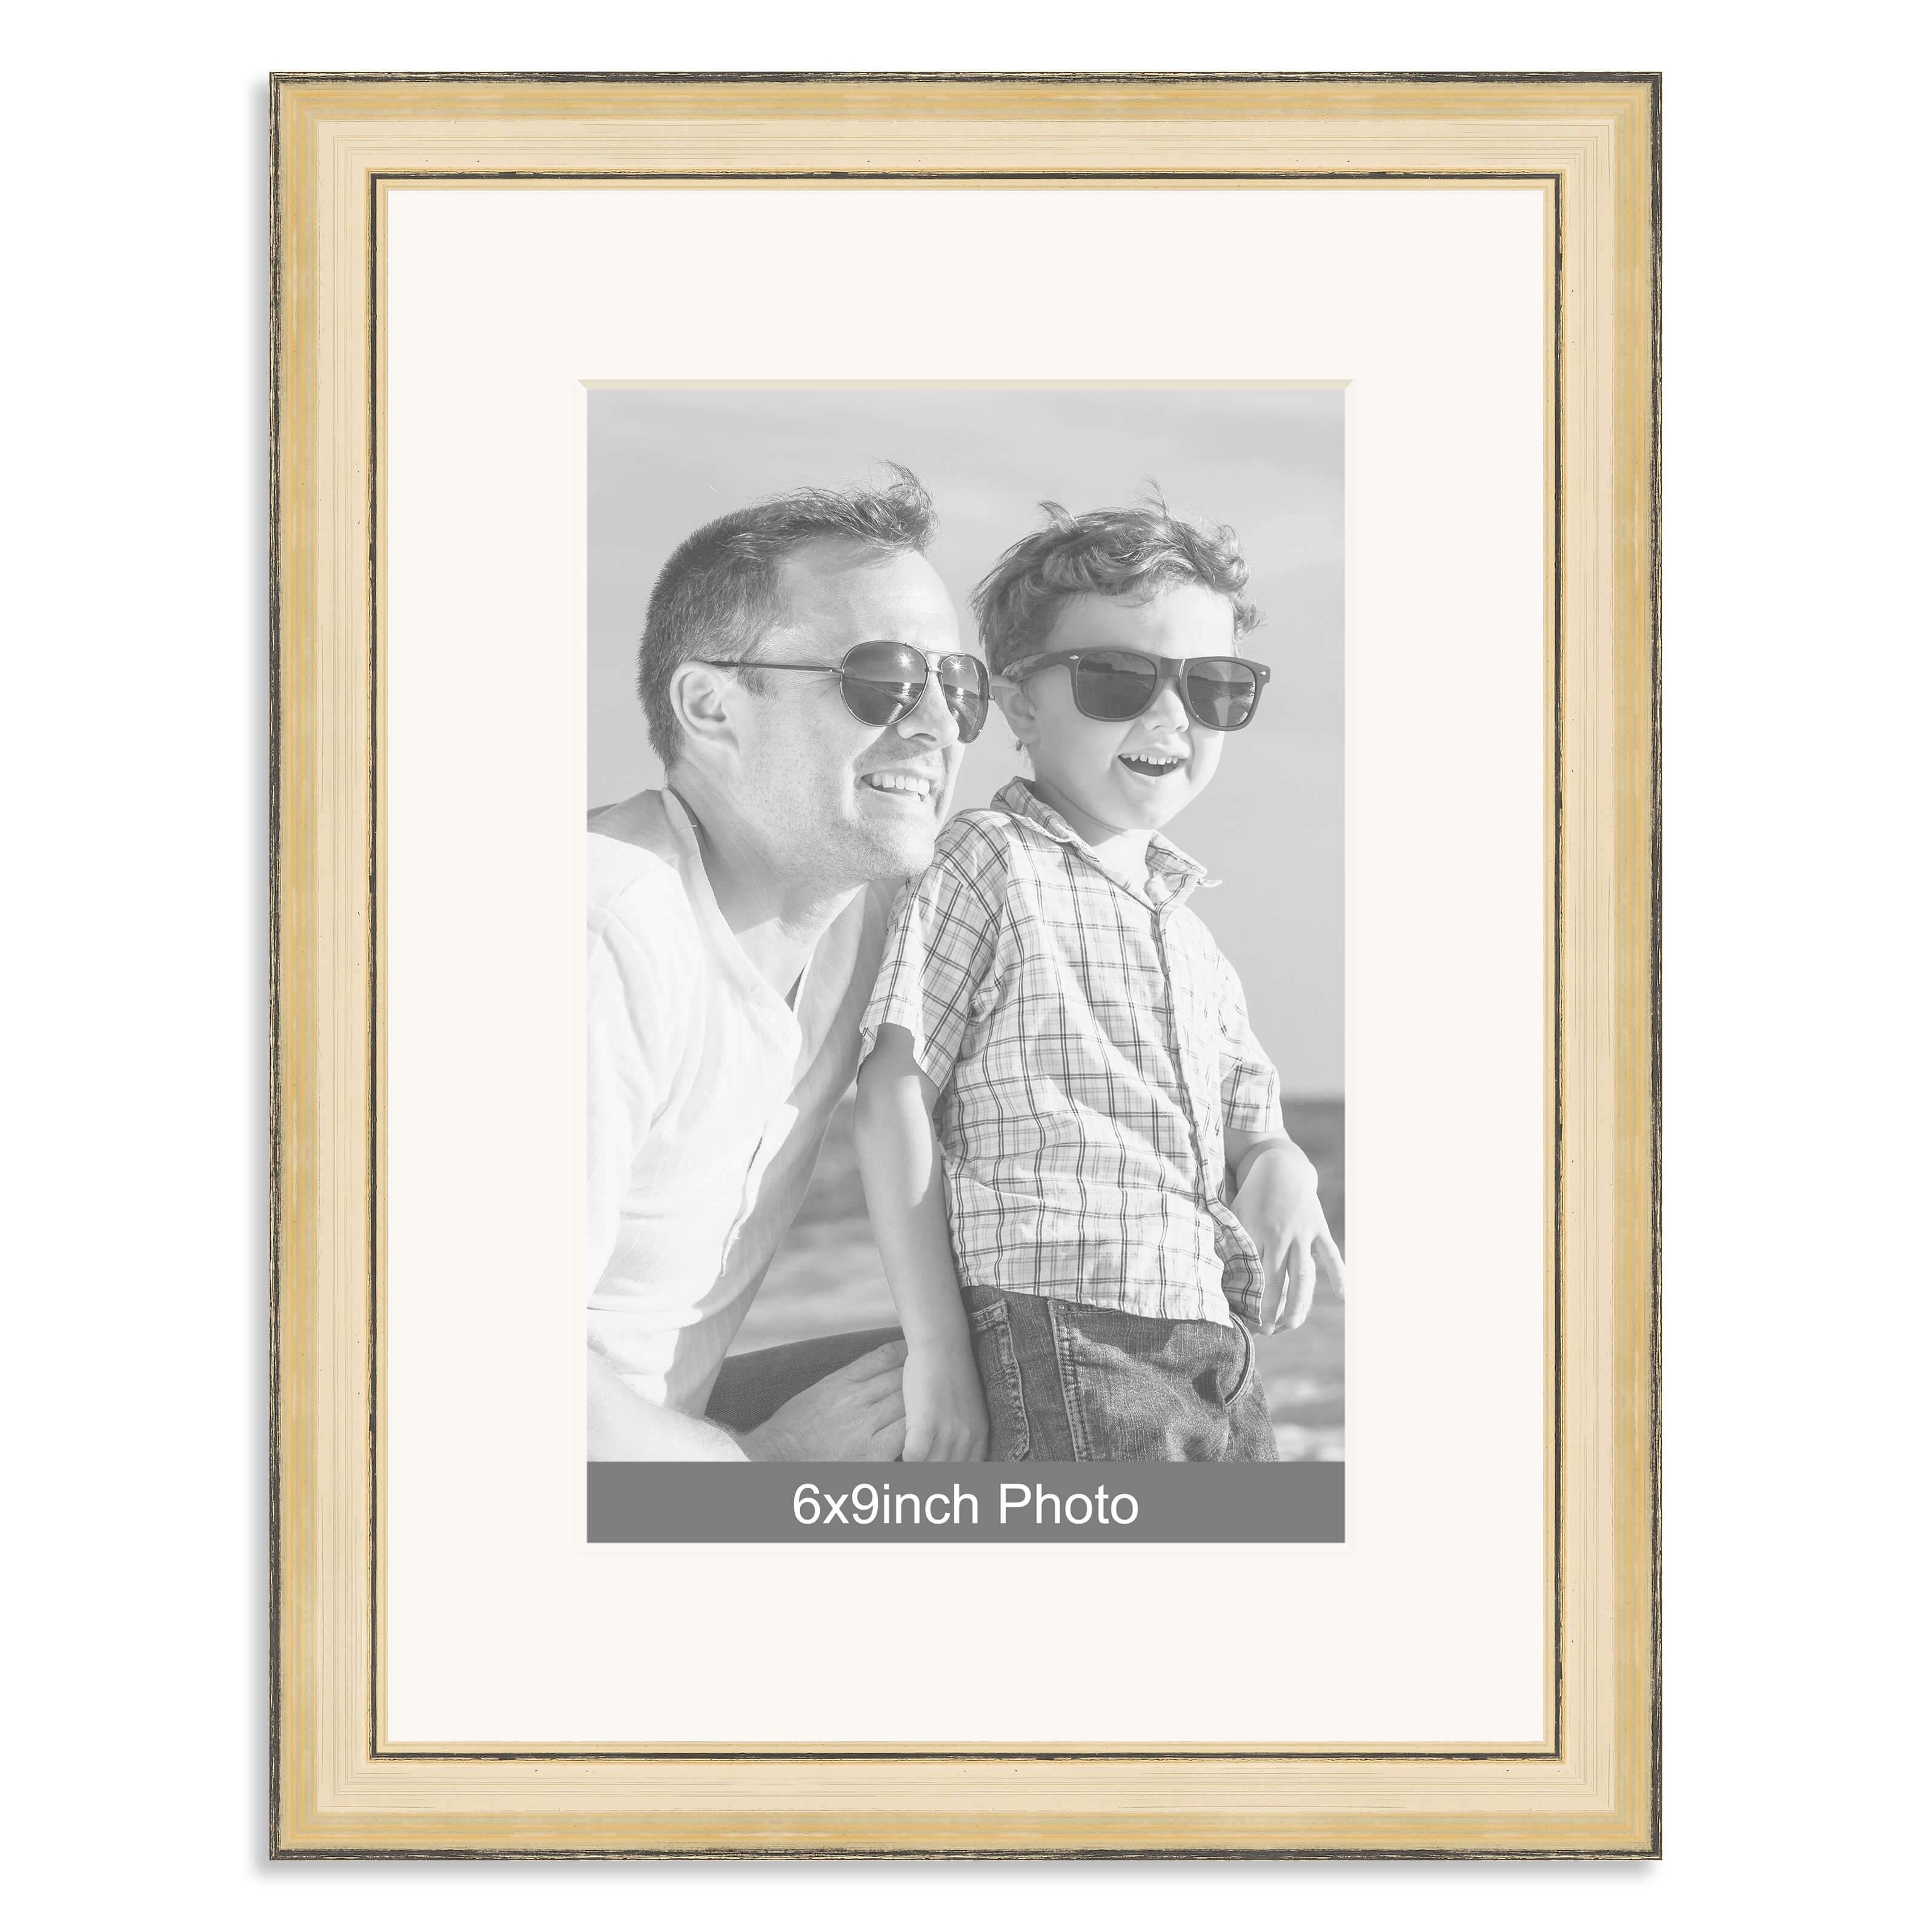 Gold Wooden Photo Frame with mount for a 9×6/6x9in Photo – Photo to follow by email